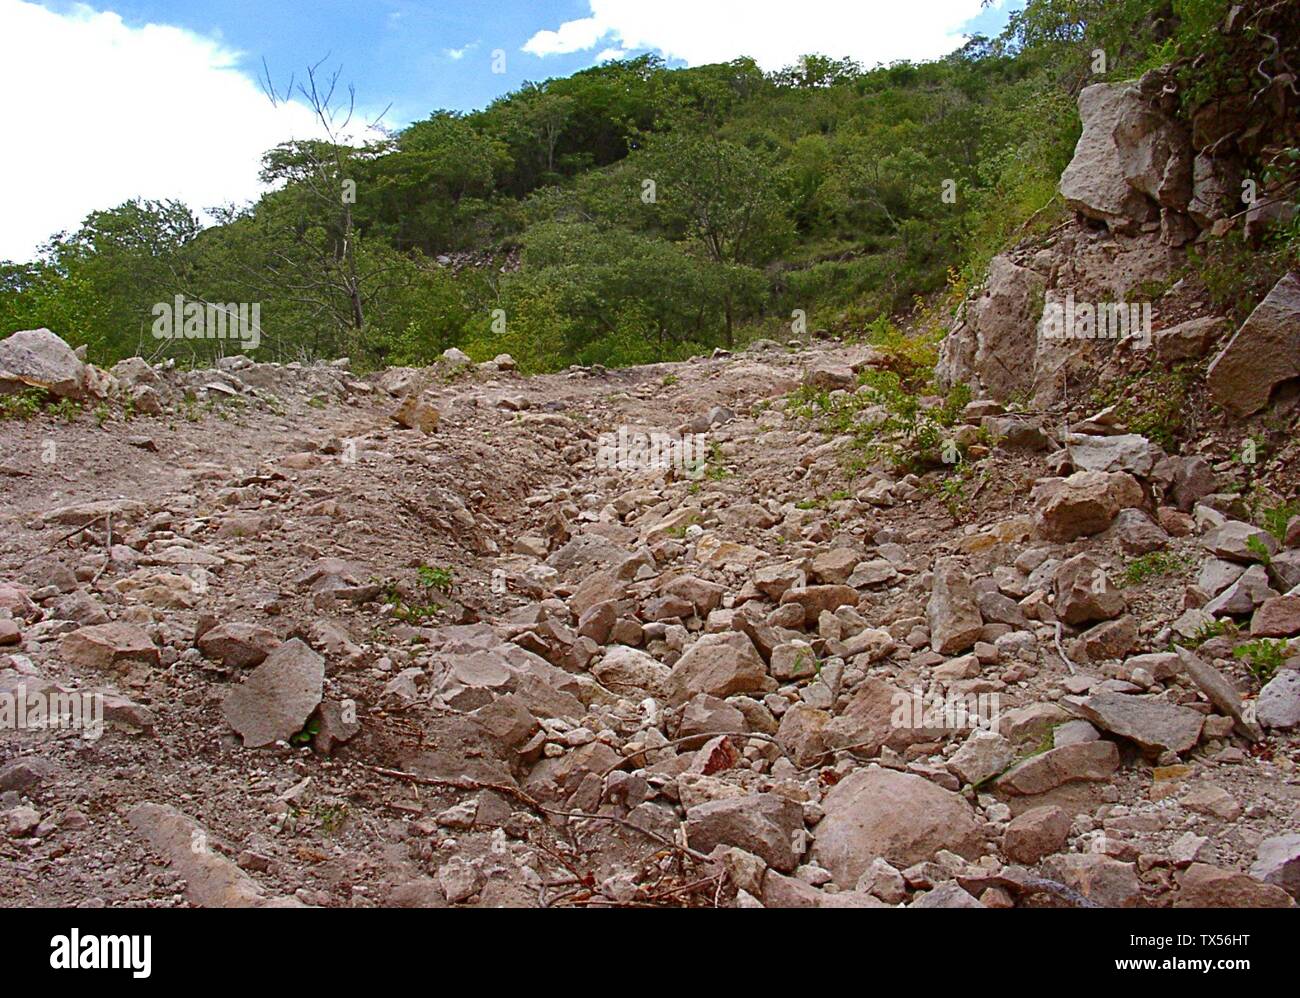 Pix26: A really rough rocky way.  Taken looking forward from the exact same spot as Pix25. Stock Photo